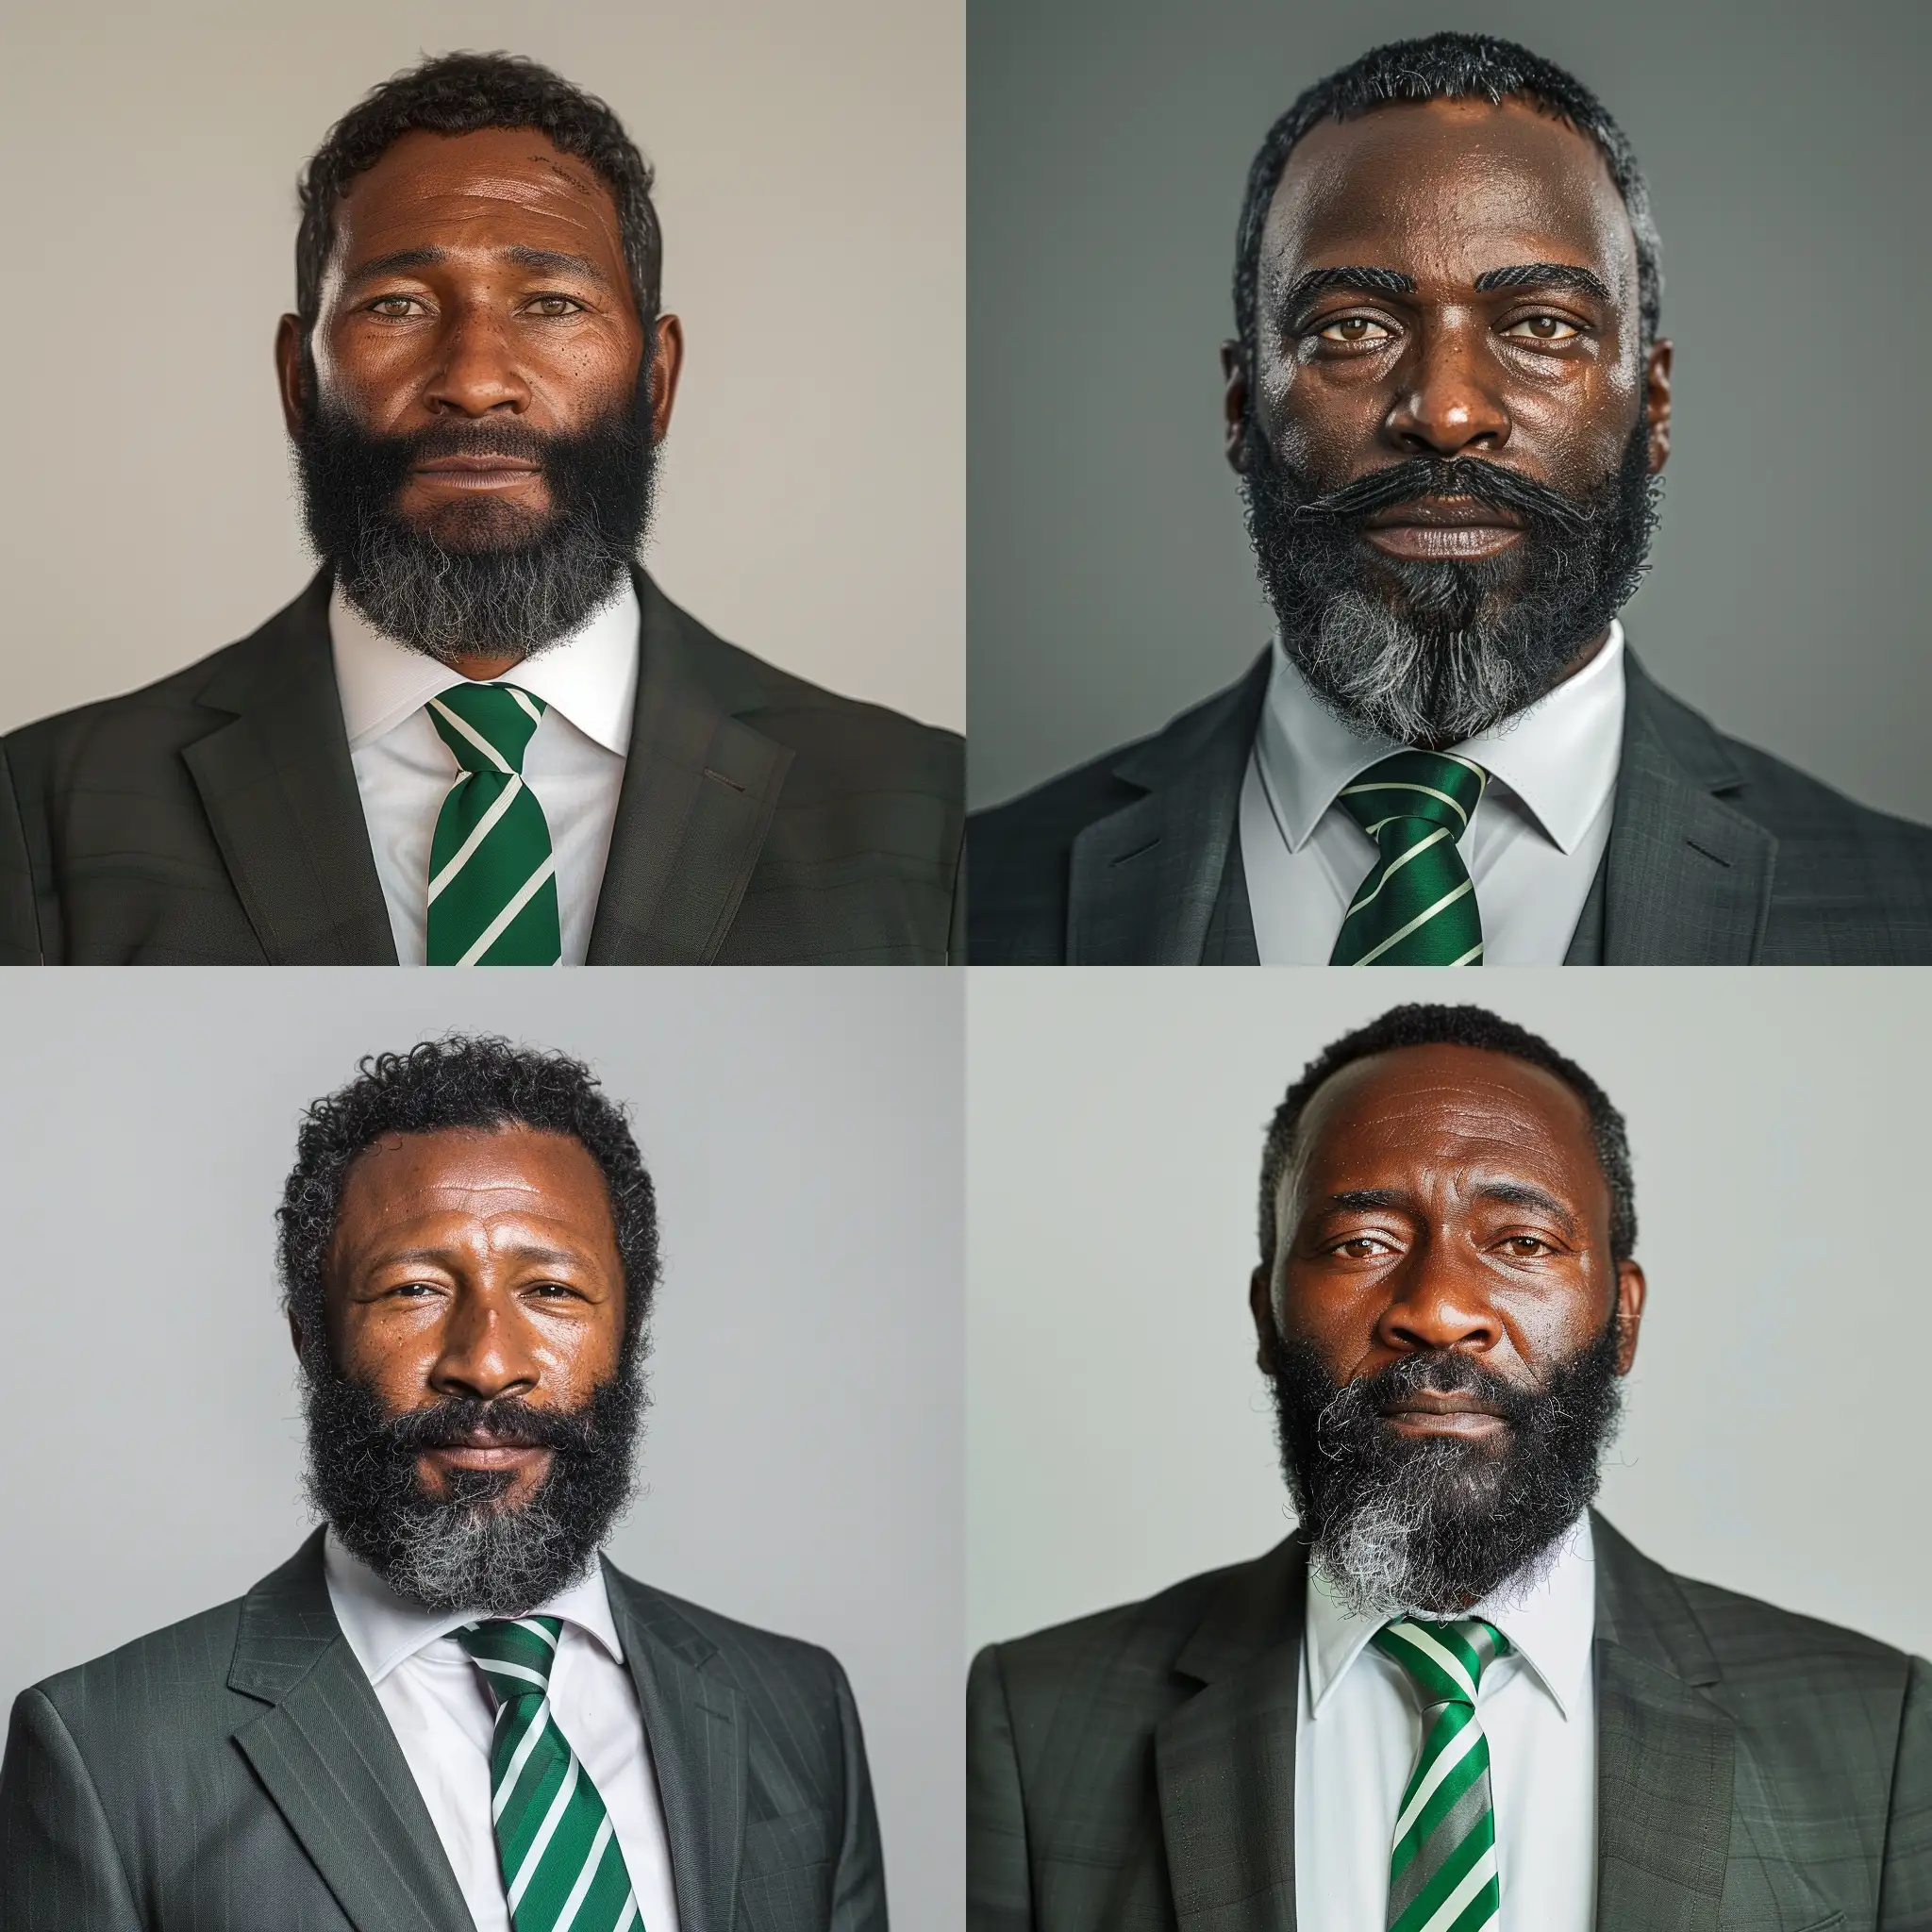 Ultra Realistic profile photo of the Chairman of football club Waltham Abbey. He is of from England, Afro/Caribbean ethnicity. Born in 1977. Well kept beard, in suit and tie. Tie is striped green and white. In the style of facepack for game football manager 22.